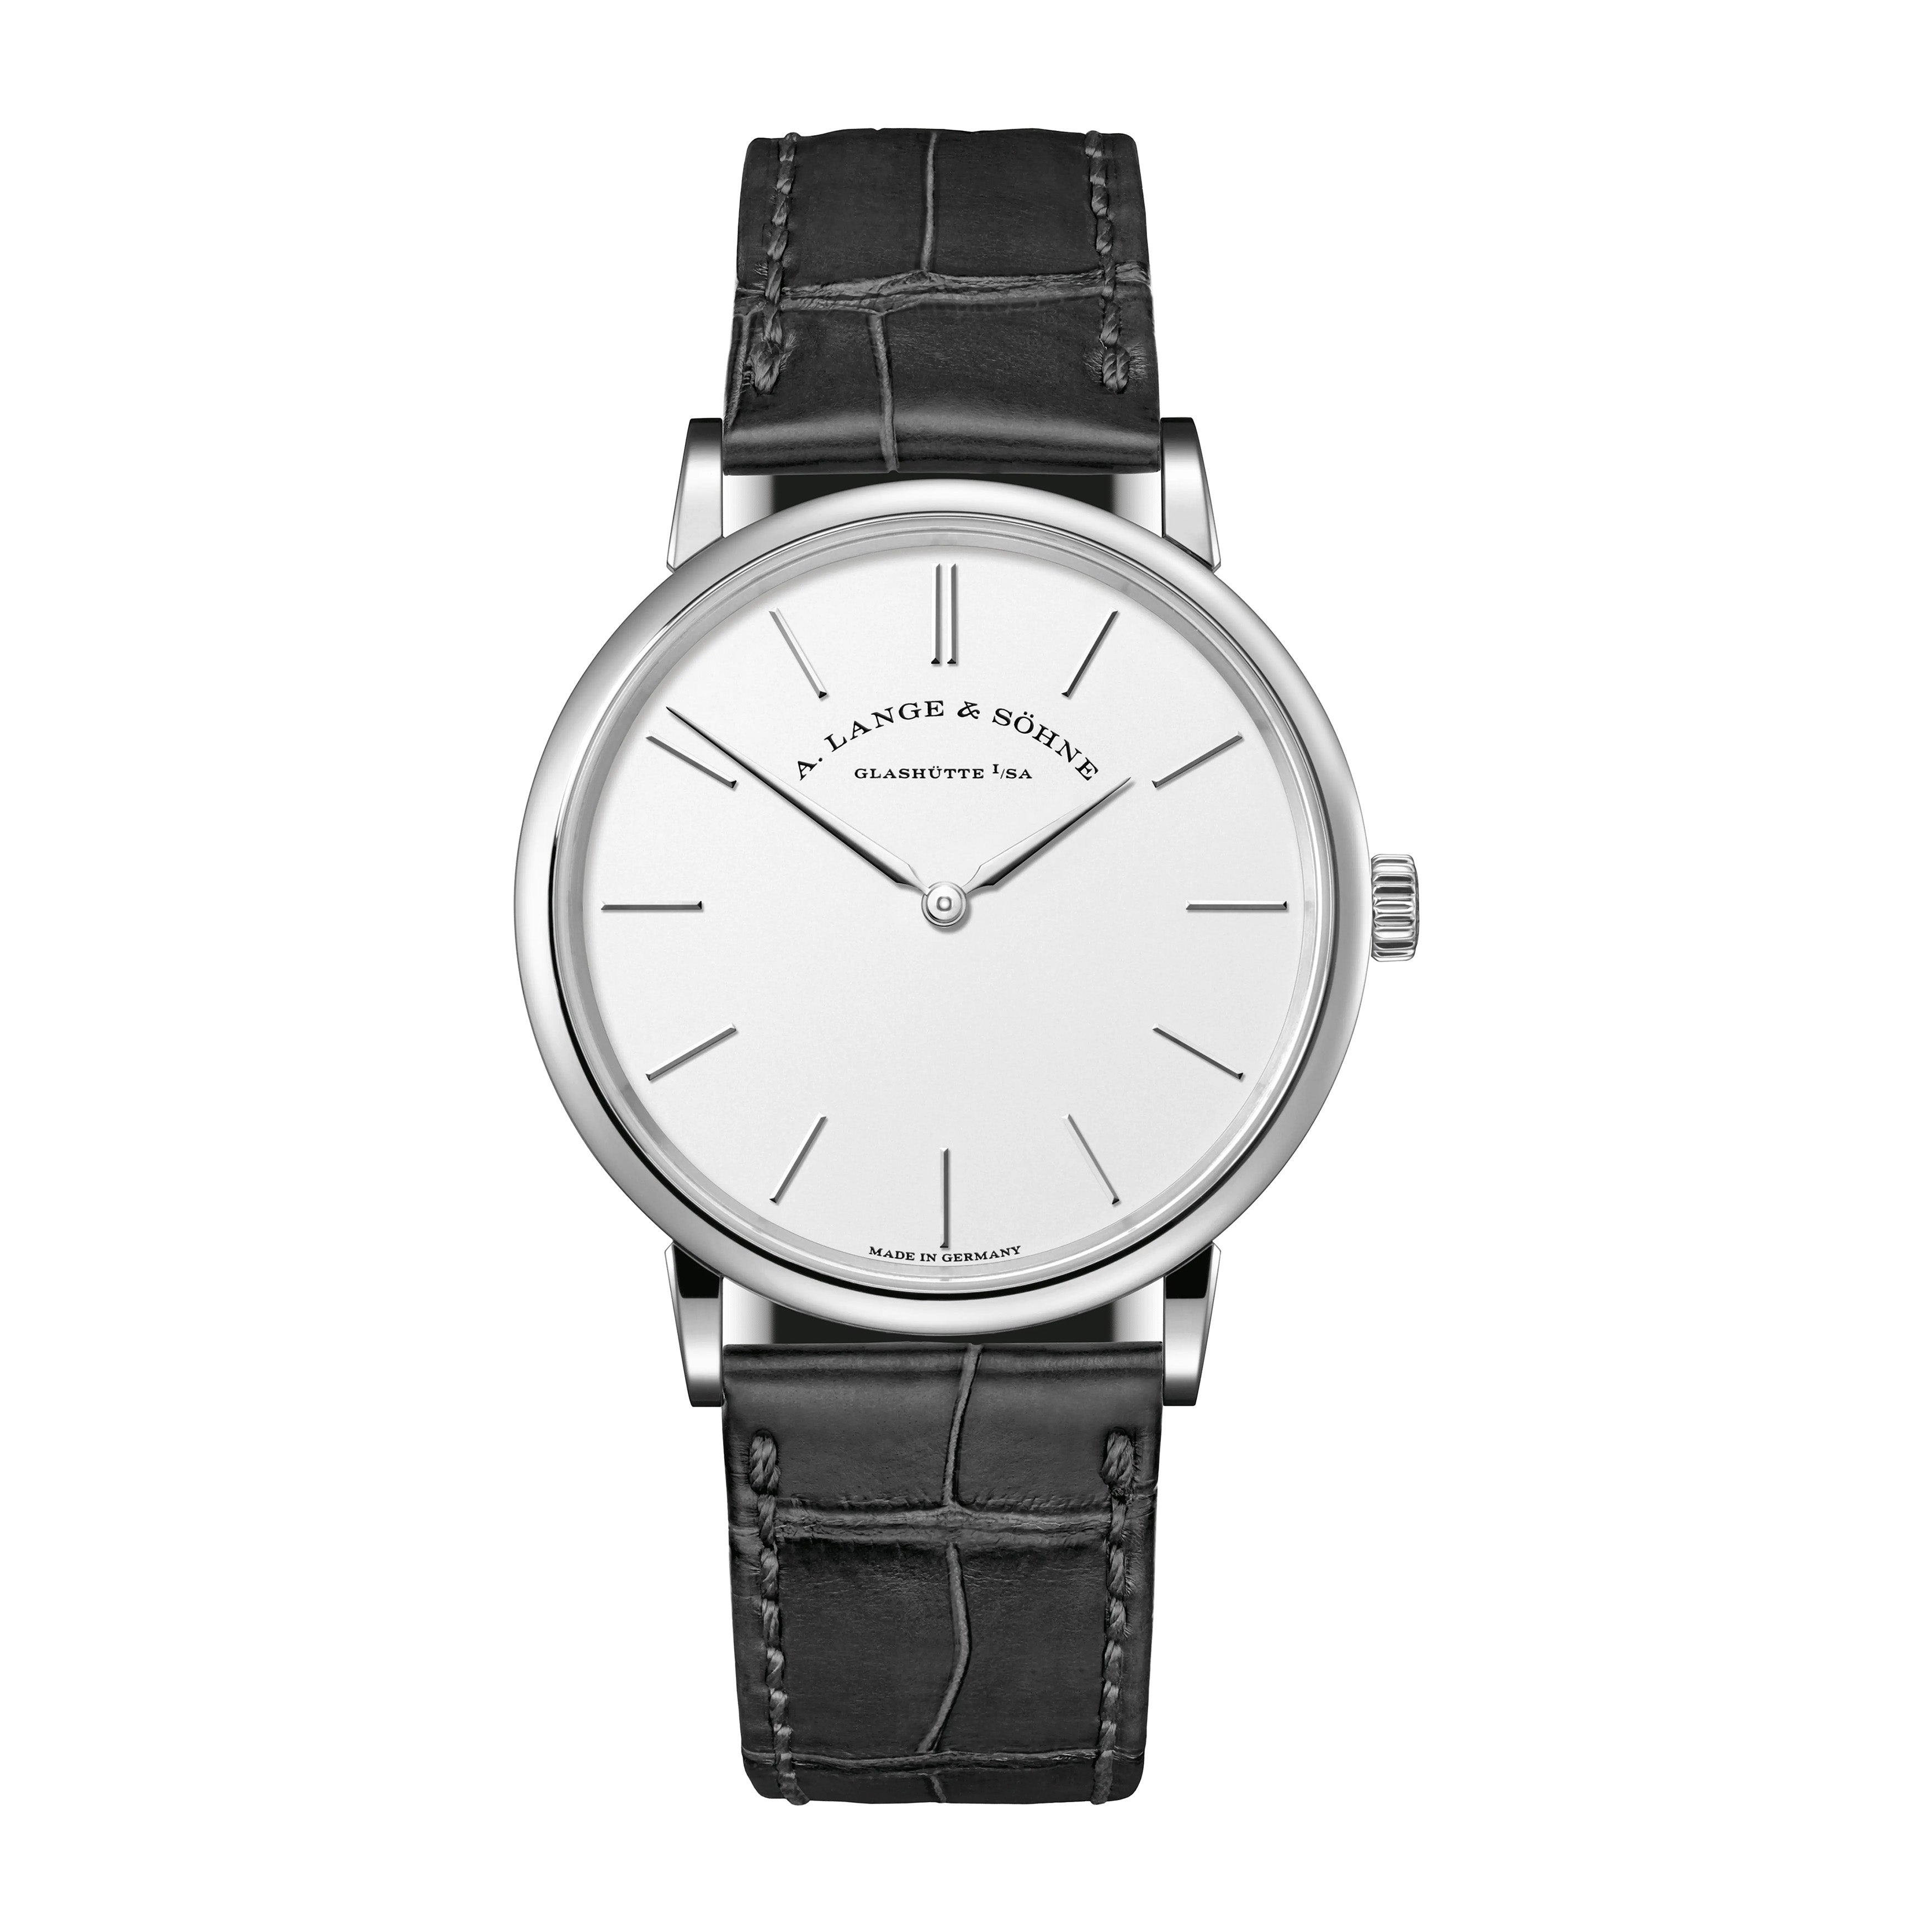 A.Lange & Sohne Saxonia Thin Watch, 37mm Silver Dial, 201.027